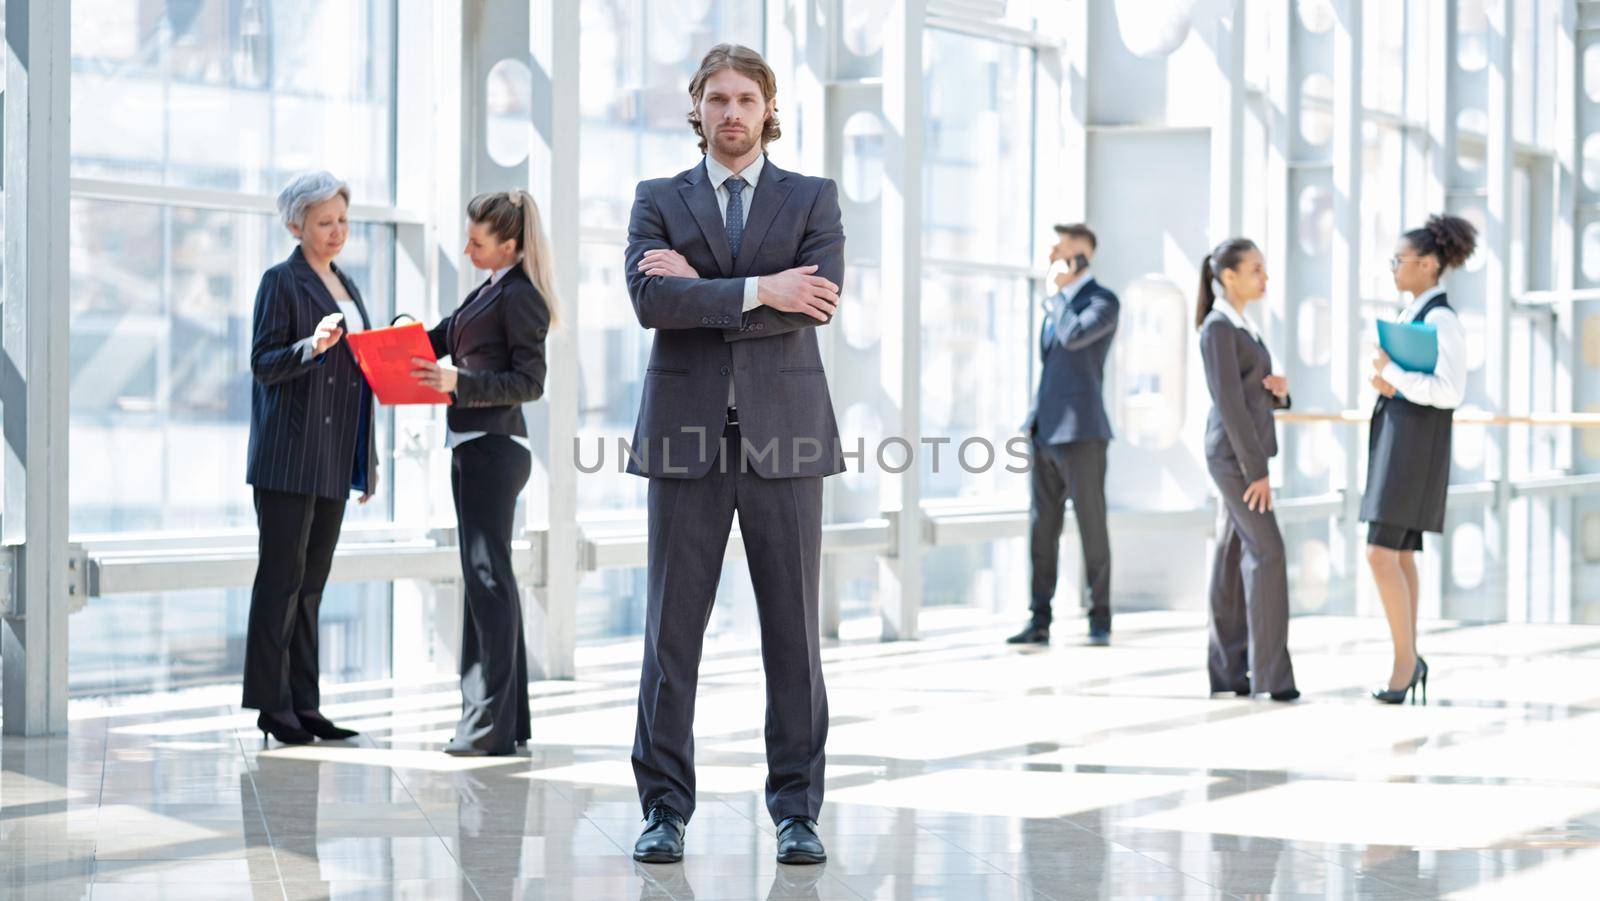 Hansome young businessman in formal suit standing in front of colleagues in business building